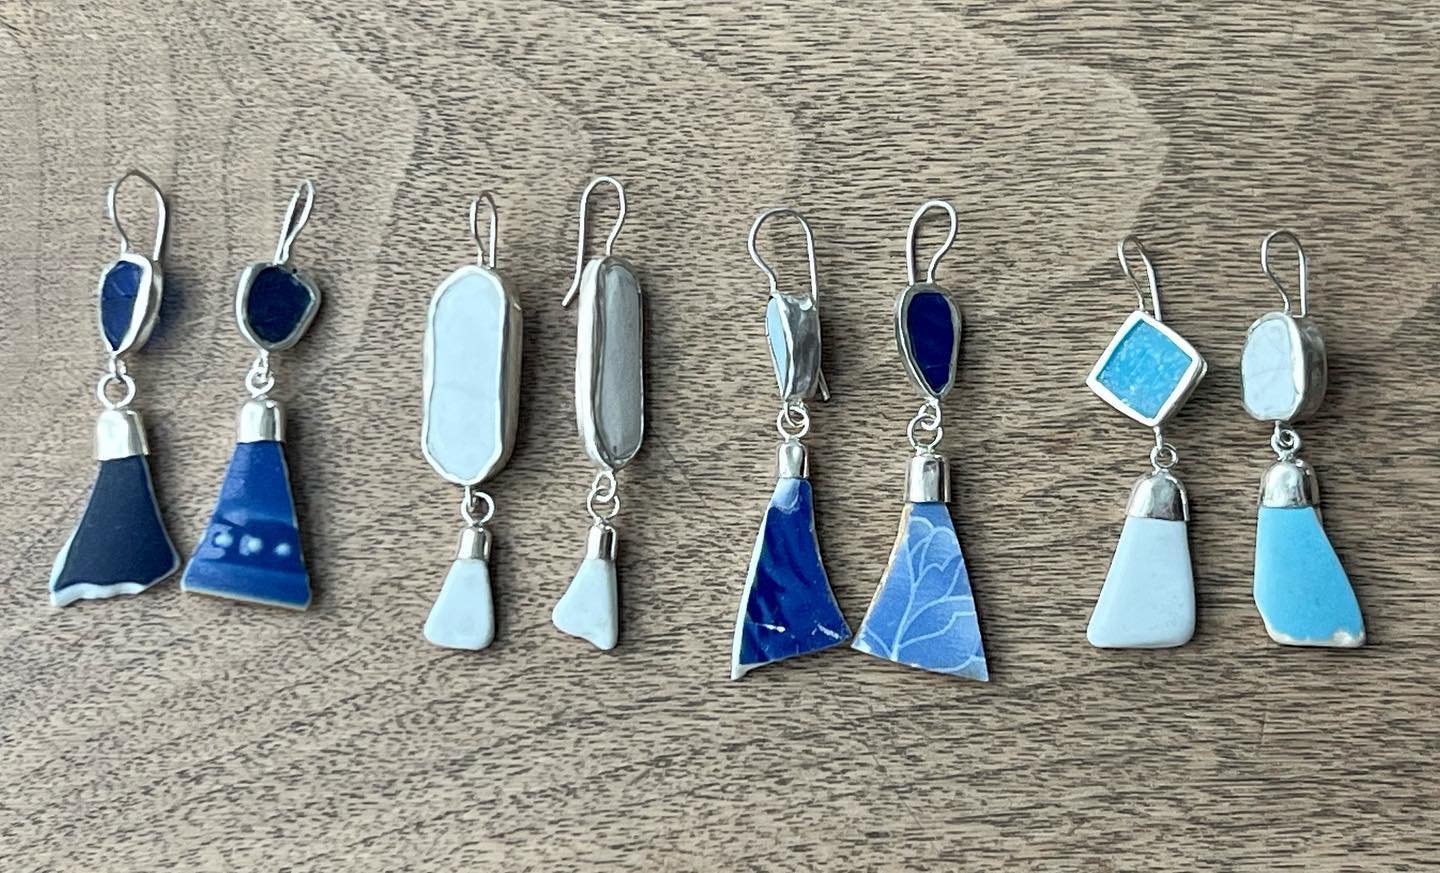 Beach tumble blue porcelain earrings. 

Created with pieces collected after many years along my many beach strolls 

Interested to see more? 
Follow here
Check out my website, @suzette.eu 
DM here with inquiries. 
-
-
- 
#earrings #hangingearrings #r